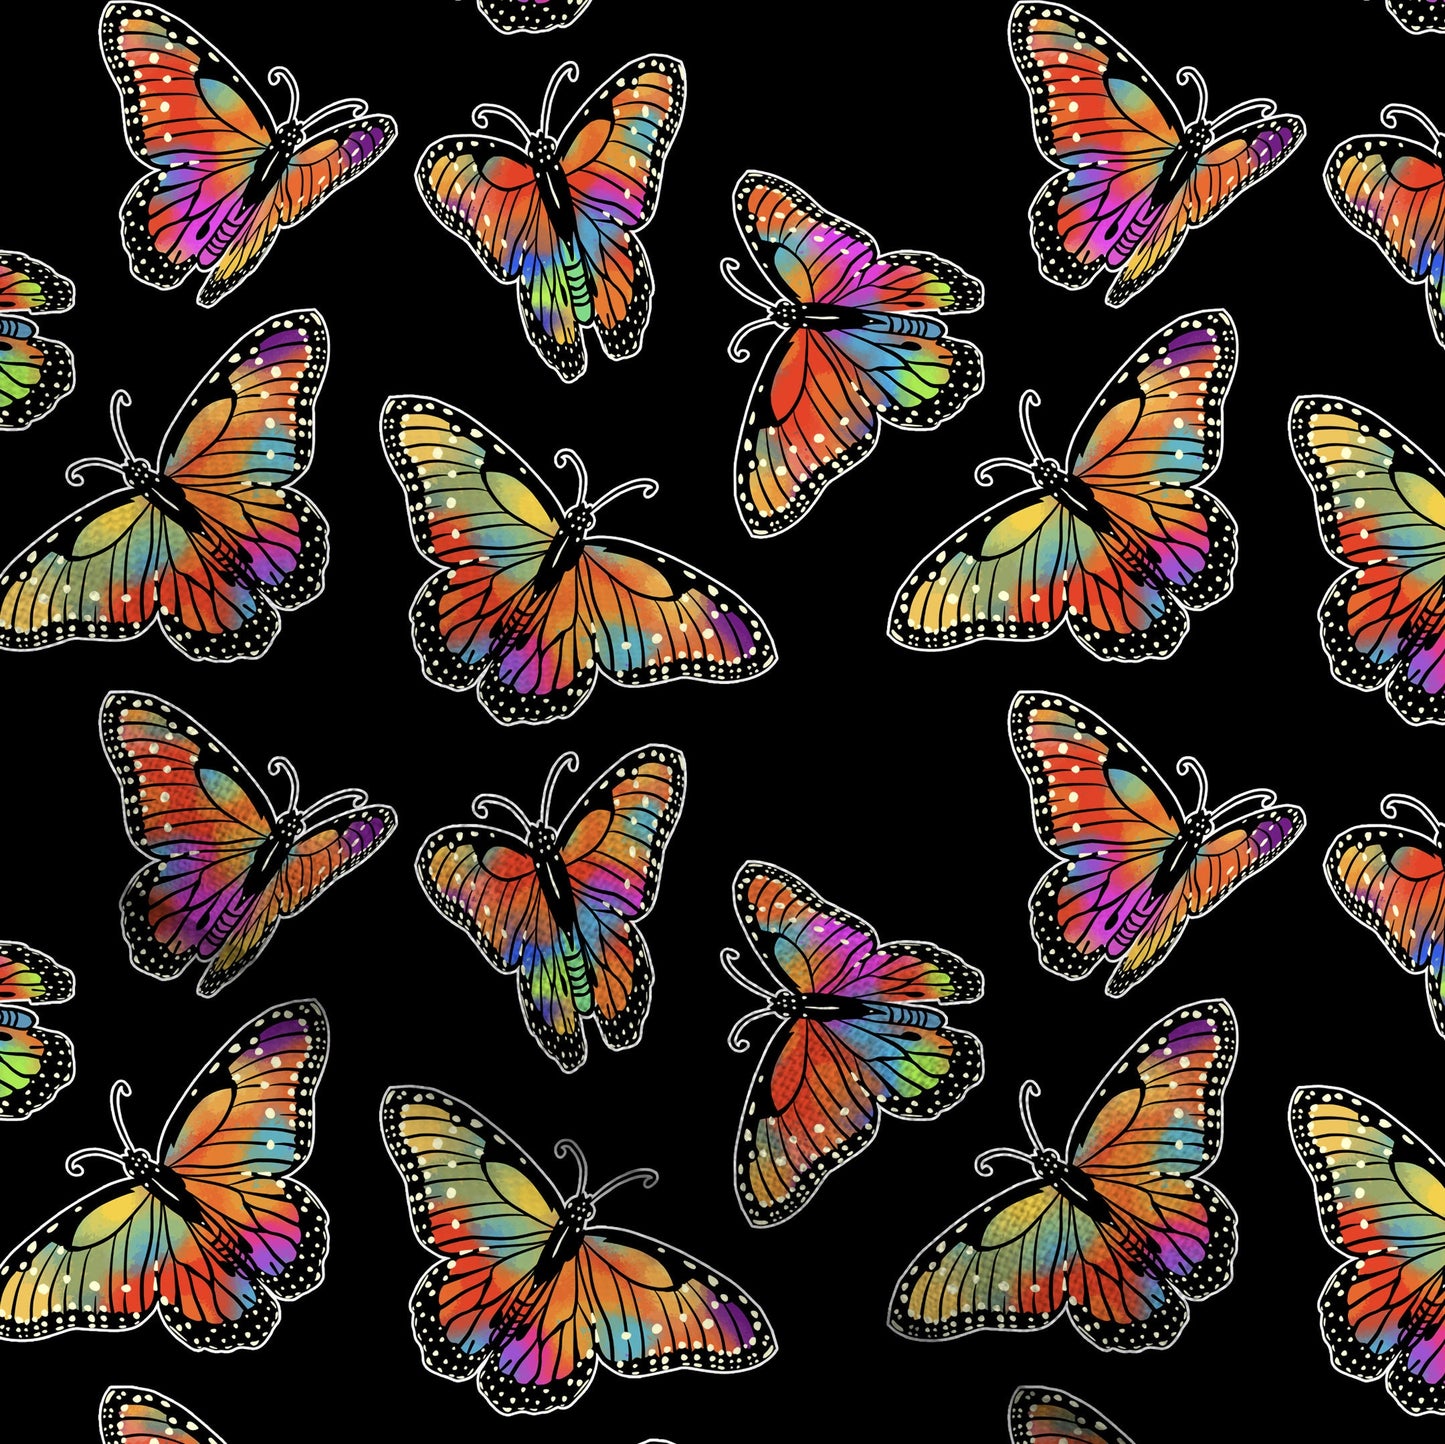 Rainbow Butterflies on Black Fabric By the Yard. Monarch Butterfly Pattern, Cottagecore Design for Crafts, Upholstery, Clothing